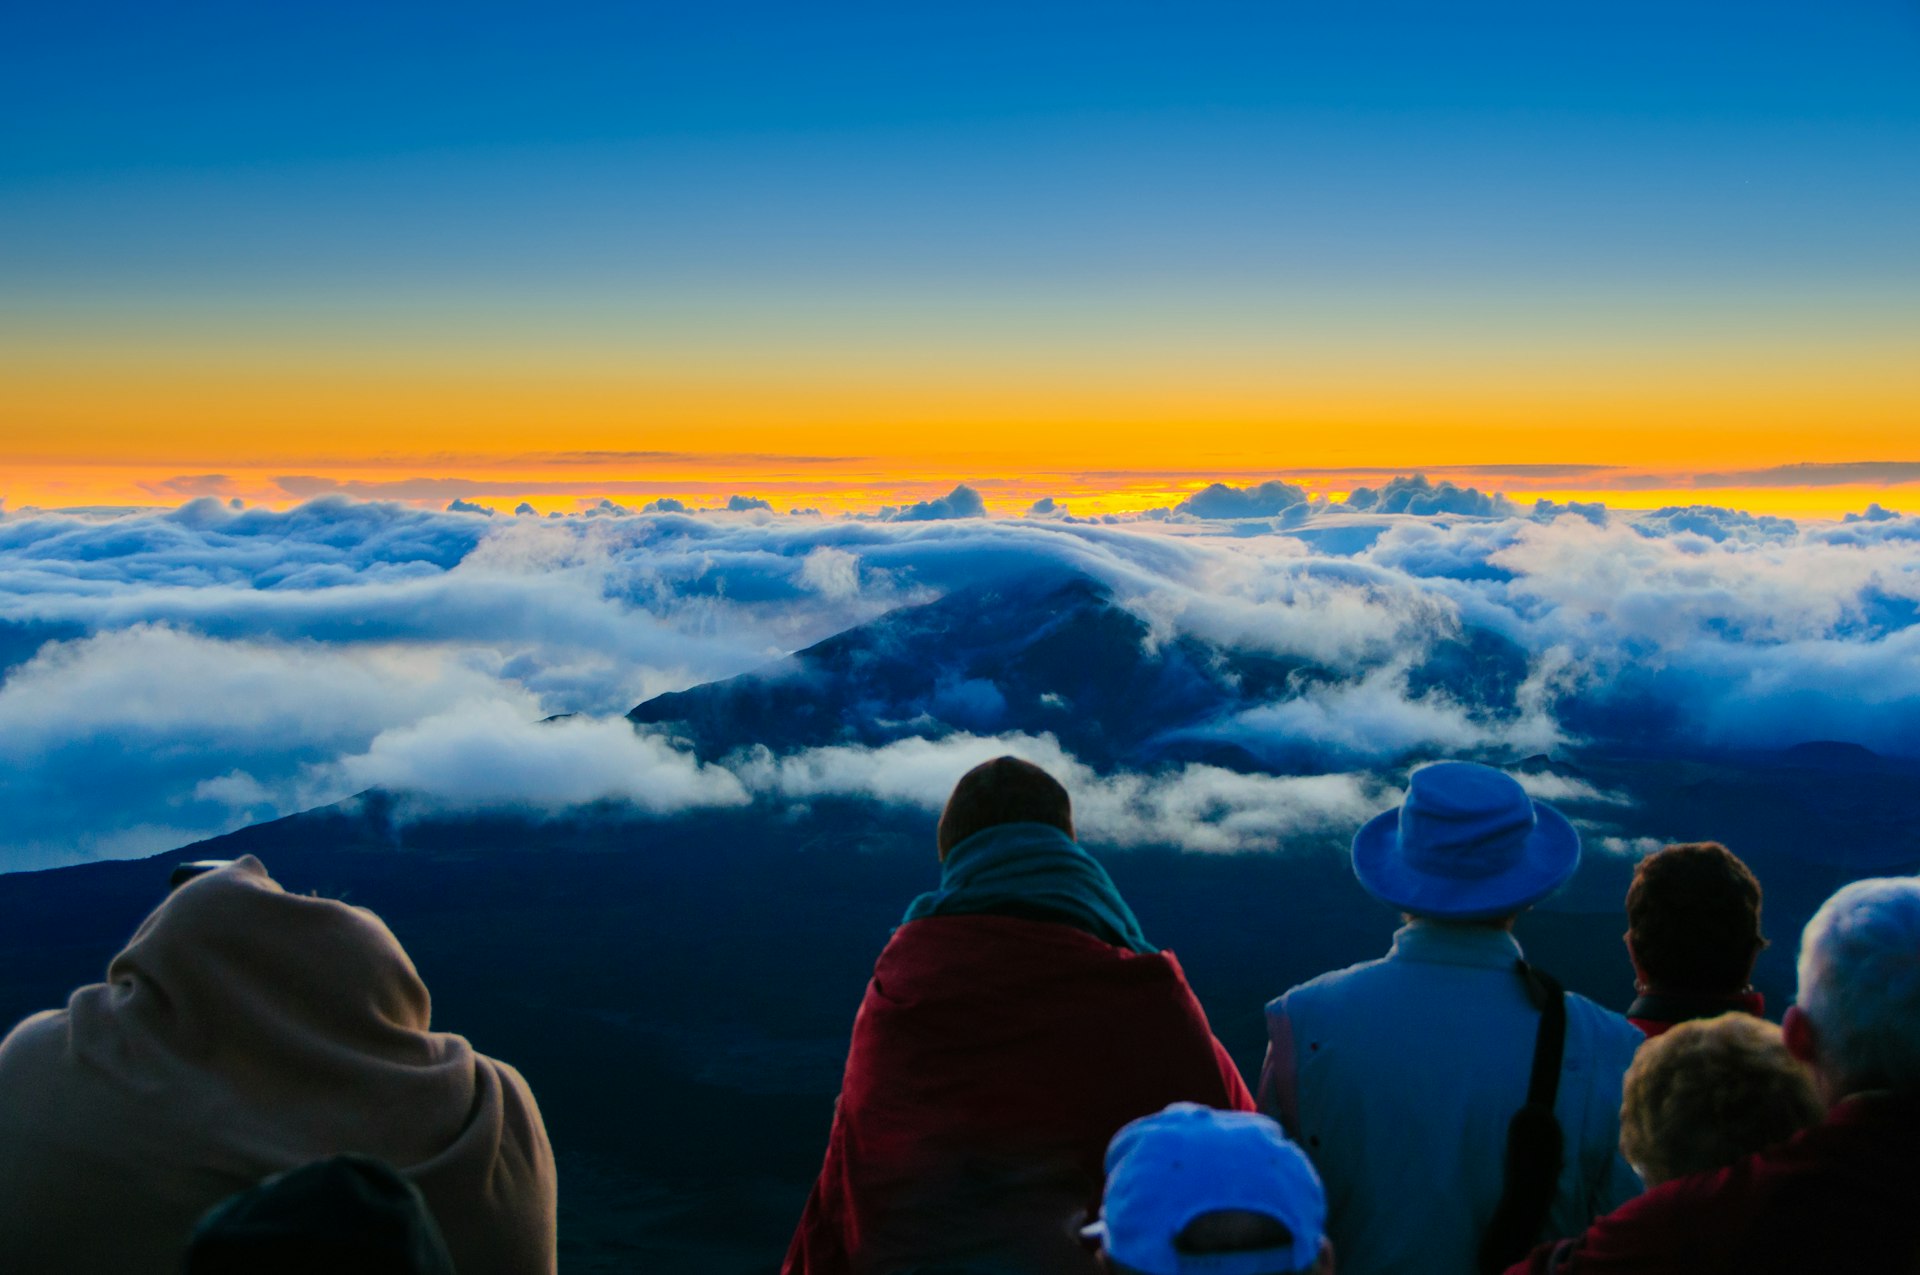 The backs of peoples' heads as they admire the sunrise over a vast crater strecthing out in front of them. Misty cloud blankets the sky below them with some peaks showing through